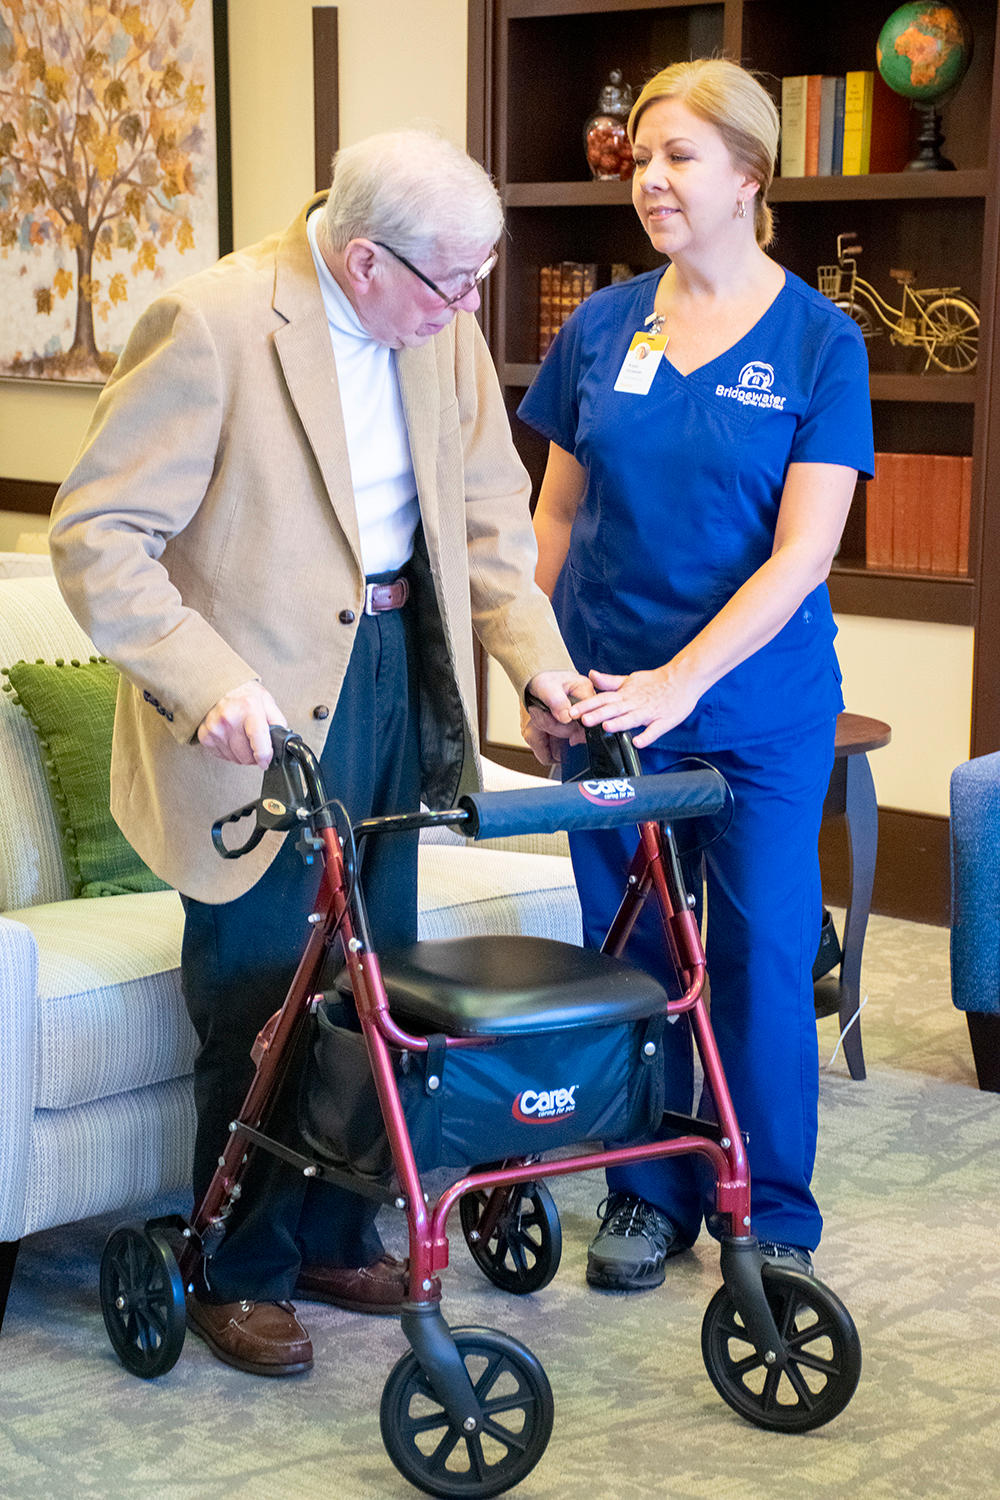 Maintain your independence while living in the comfort of your own home with help from Bridgewater Senior Home Care.

We are a local, family-owned business founded after our own challenging experience finding suitable senior care for an elderly family member. We want to make it easier for others in the community to find senior services and caregivers they can trust and rely on when needed the most. Our senior home care company in Strongsville offers adults and seniors truly compassionate and dependable senior care that helps you age in place.

Available 24 hours a day, seven days a week, our caregivers are always here to help.